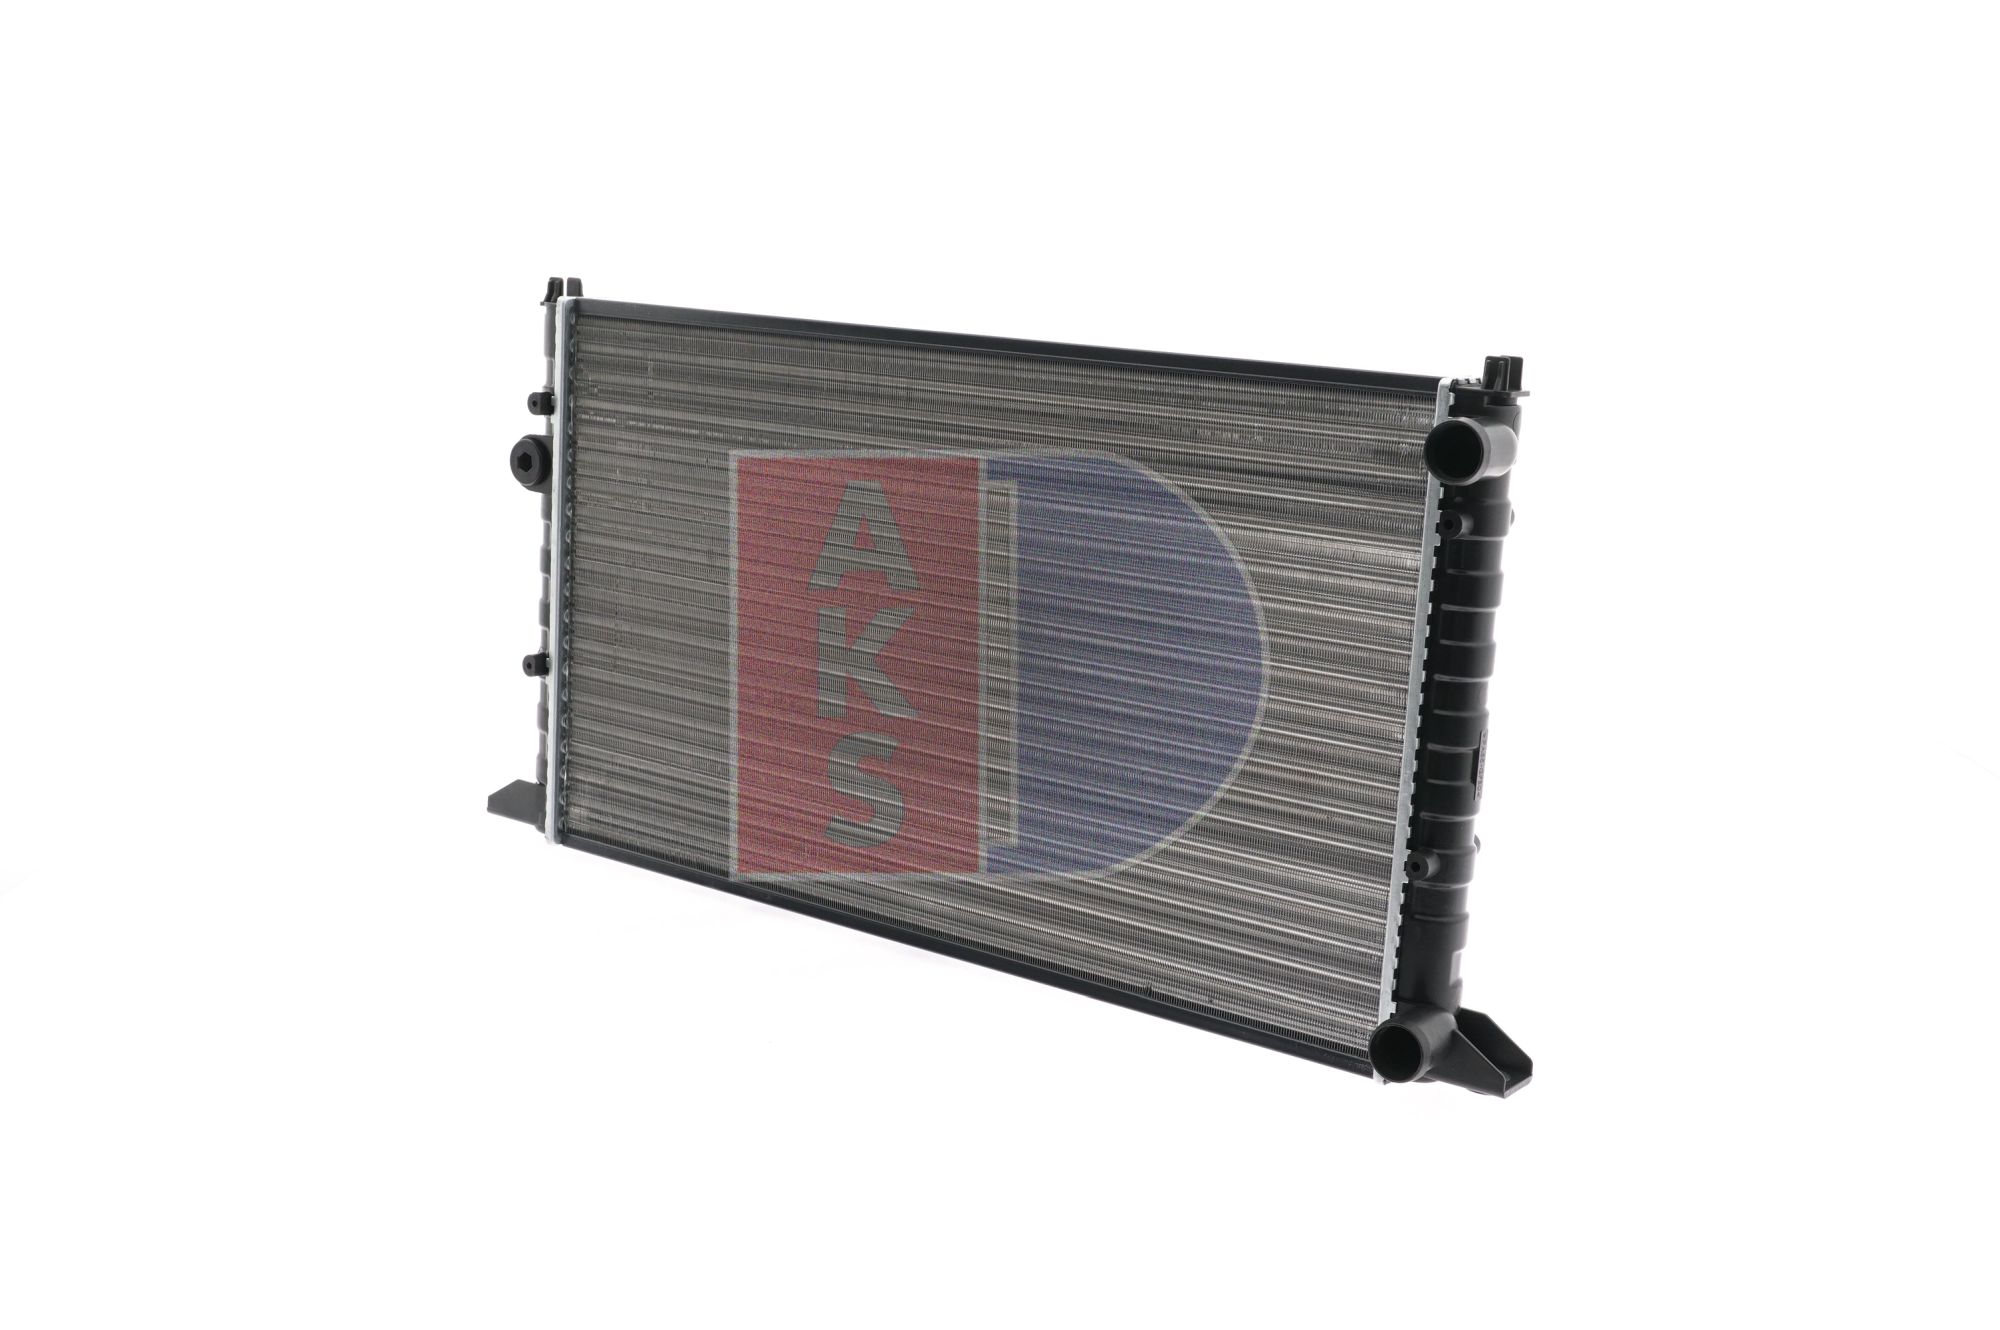 AKS DASIS 040000N Engine radiator 627 x 378 x 34 mm, Mechanically jointed cooling fins